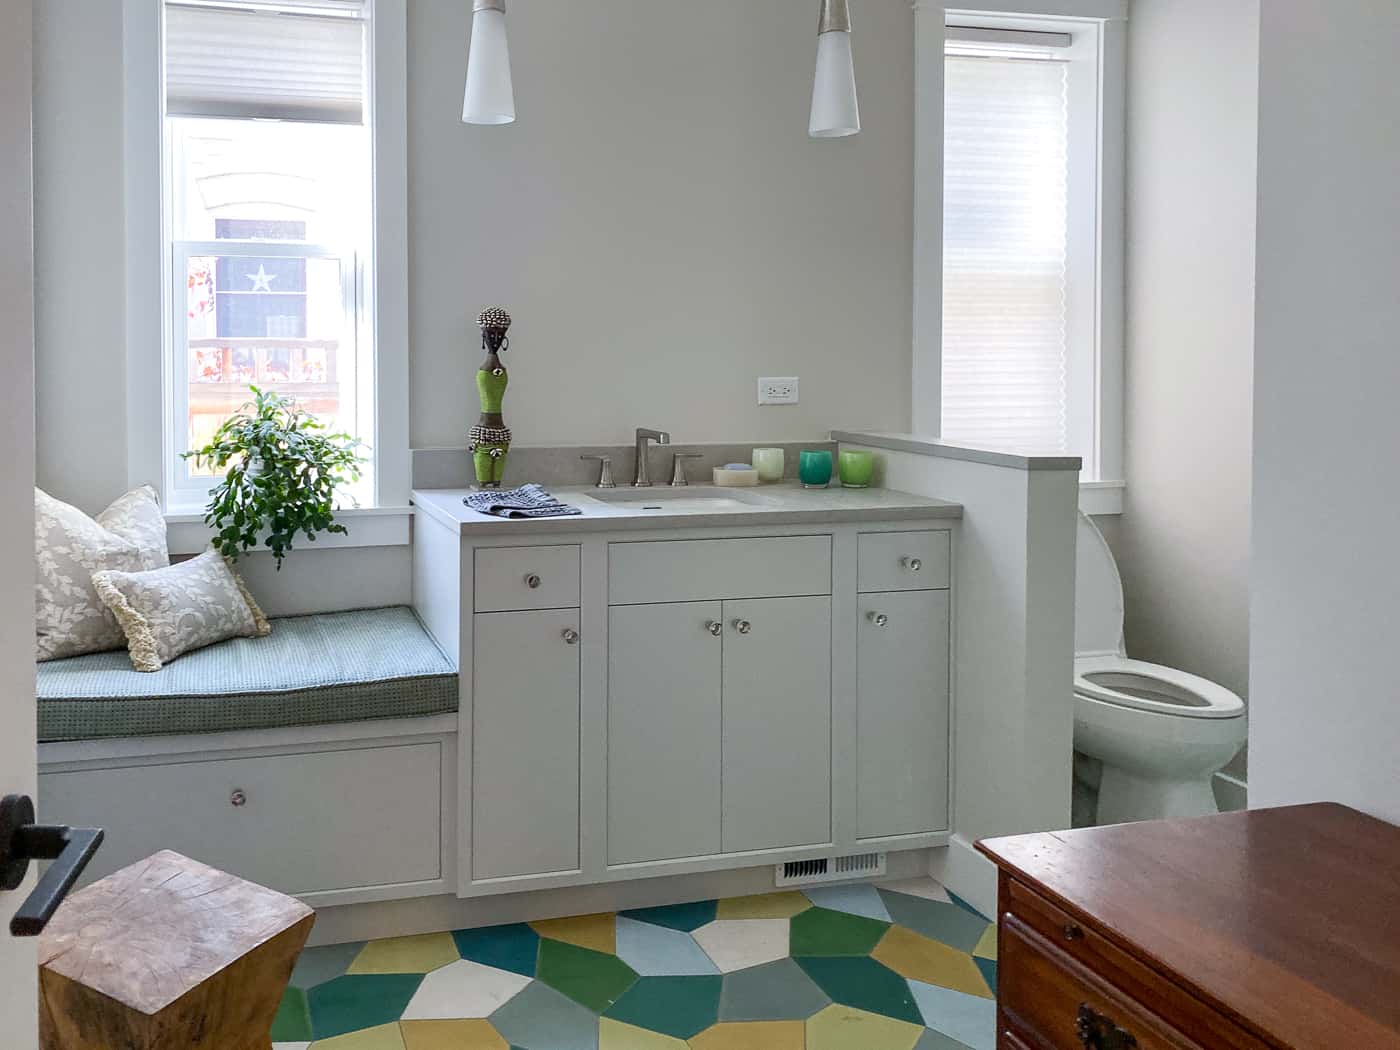 Boulder remodel - light and airy bathroom with custom colorful tile and window seat